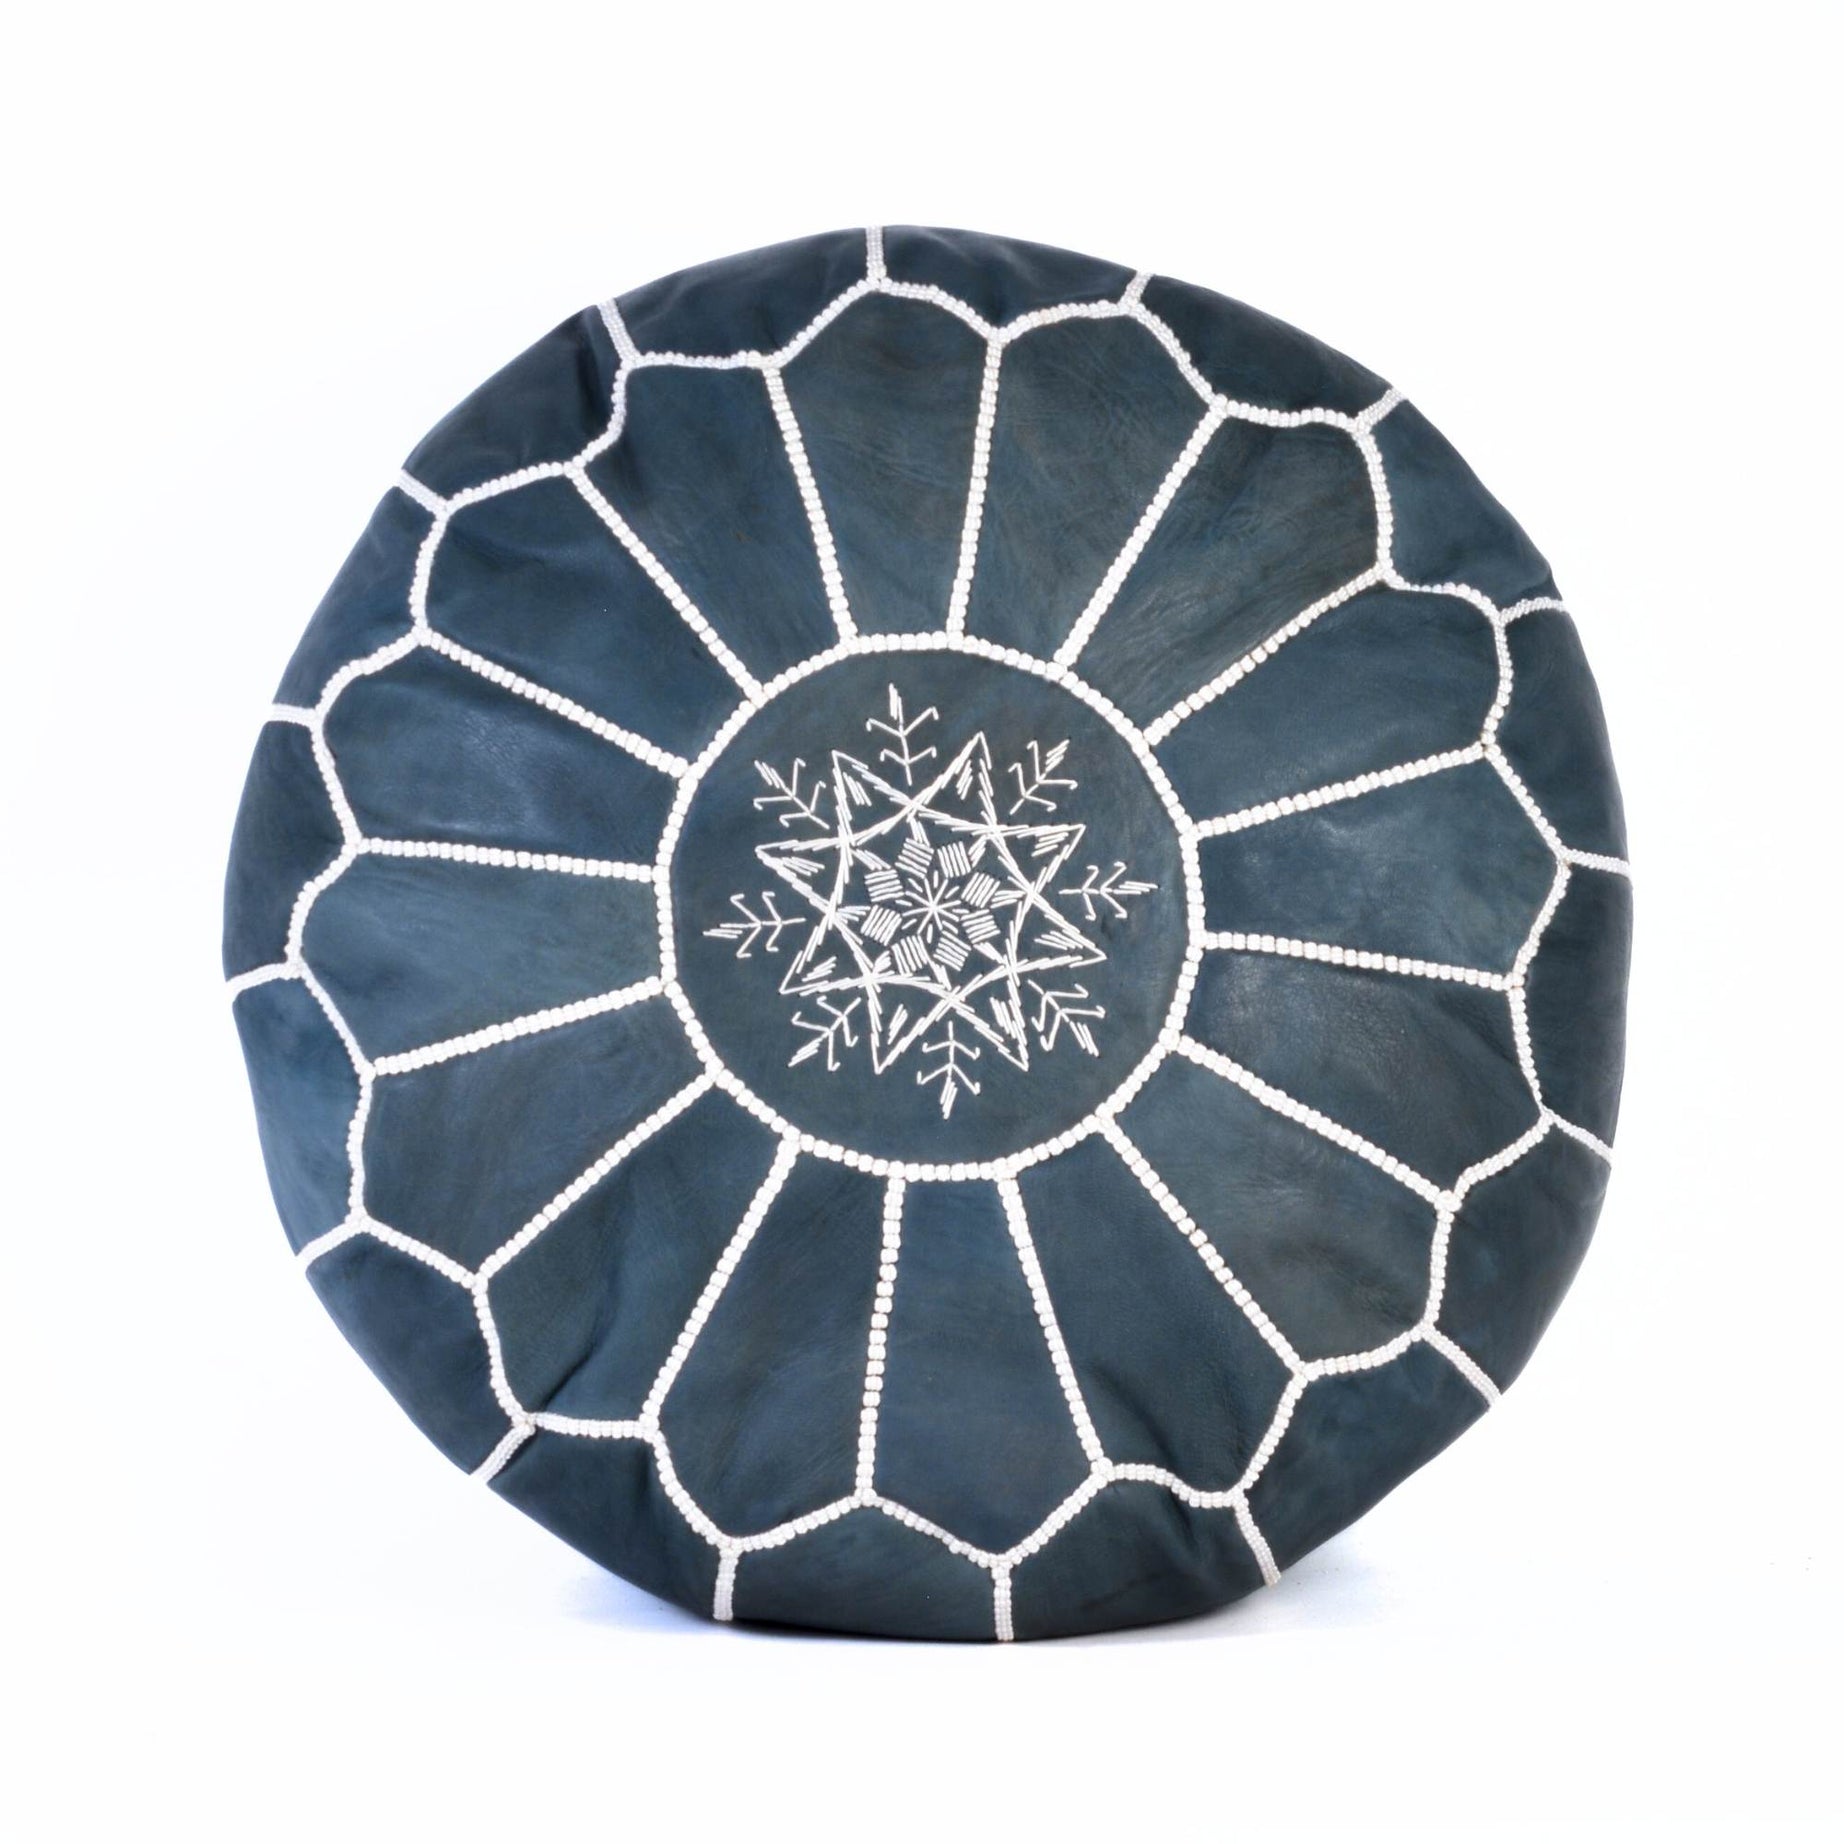 Hand-stitched Embroidery Genuine Leather Ottoman Pouf - Dark Blue